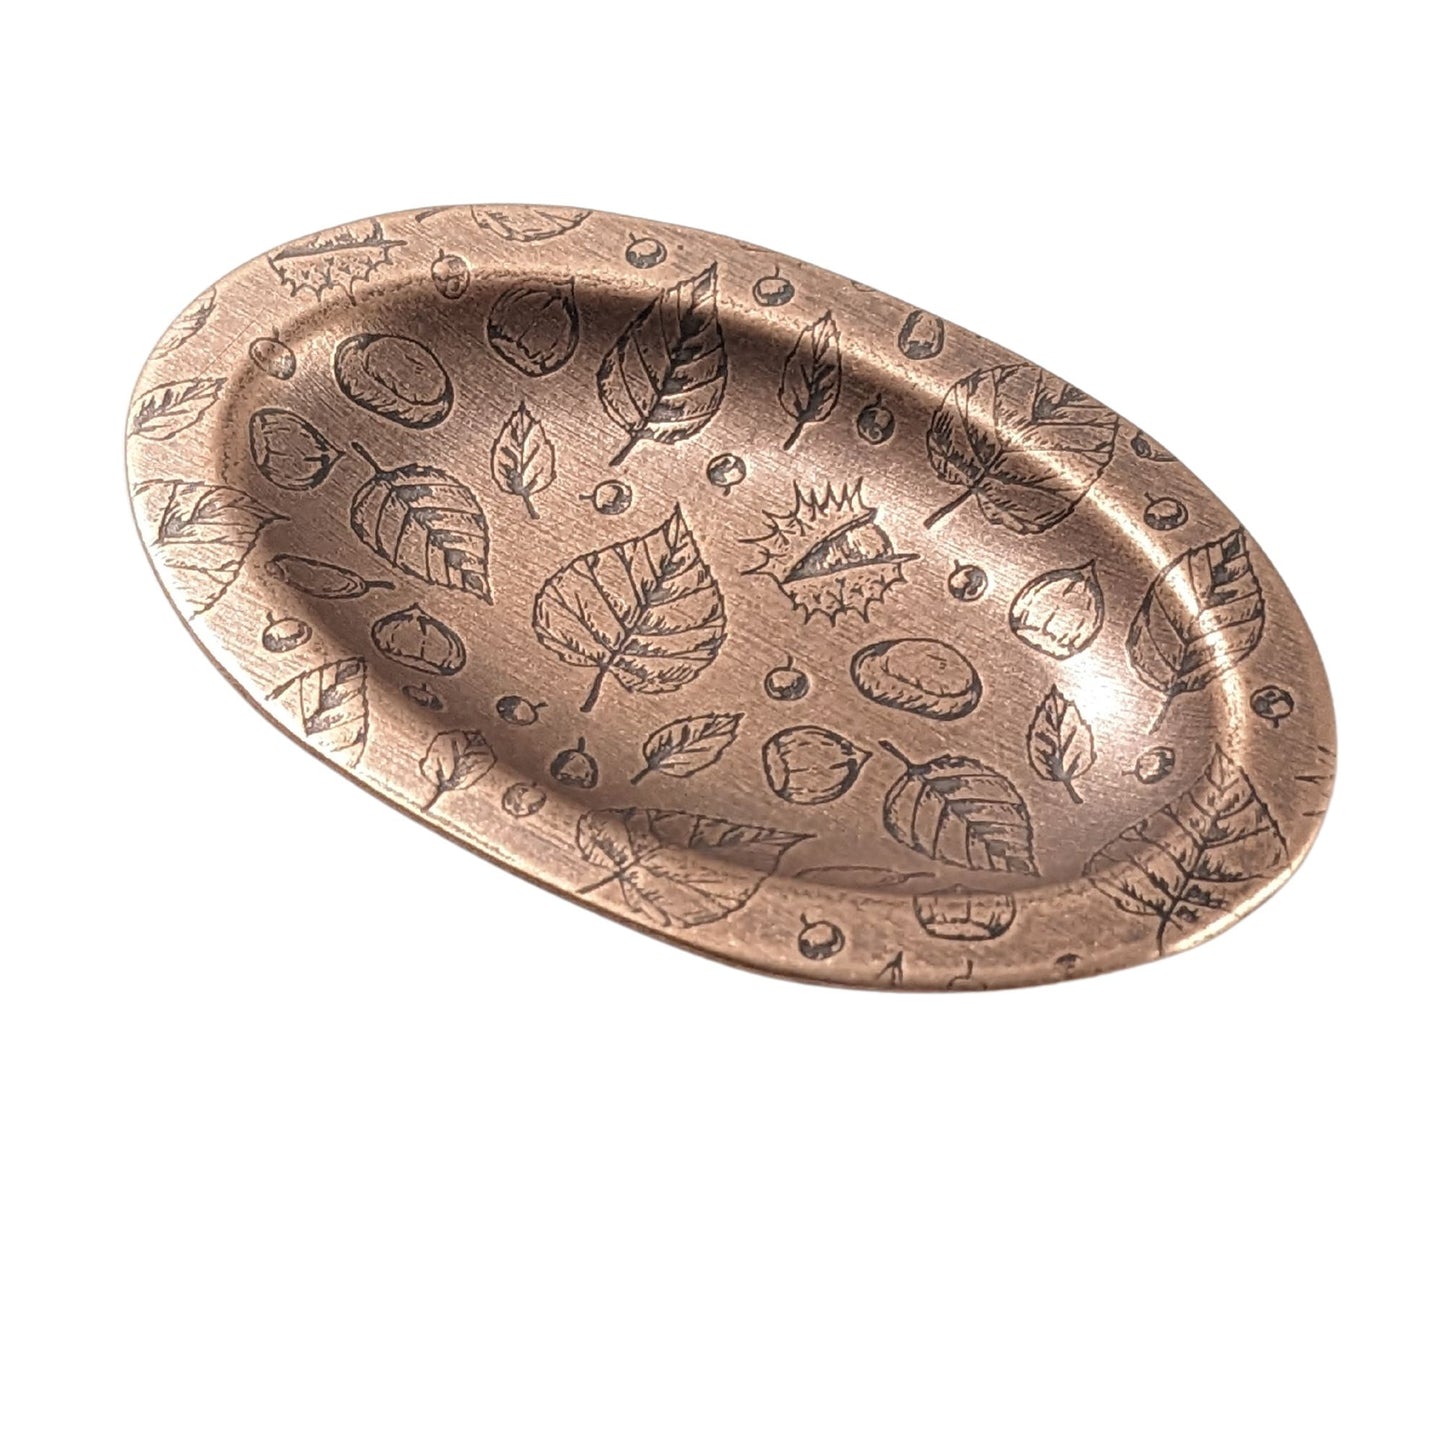 Oval copper ring dish with a raised edge. Pattern on dish is leaves, acorns, and other fall tree nuts.